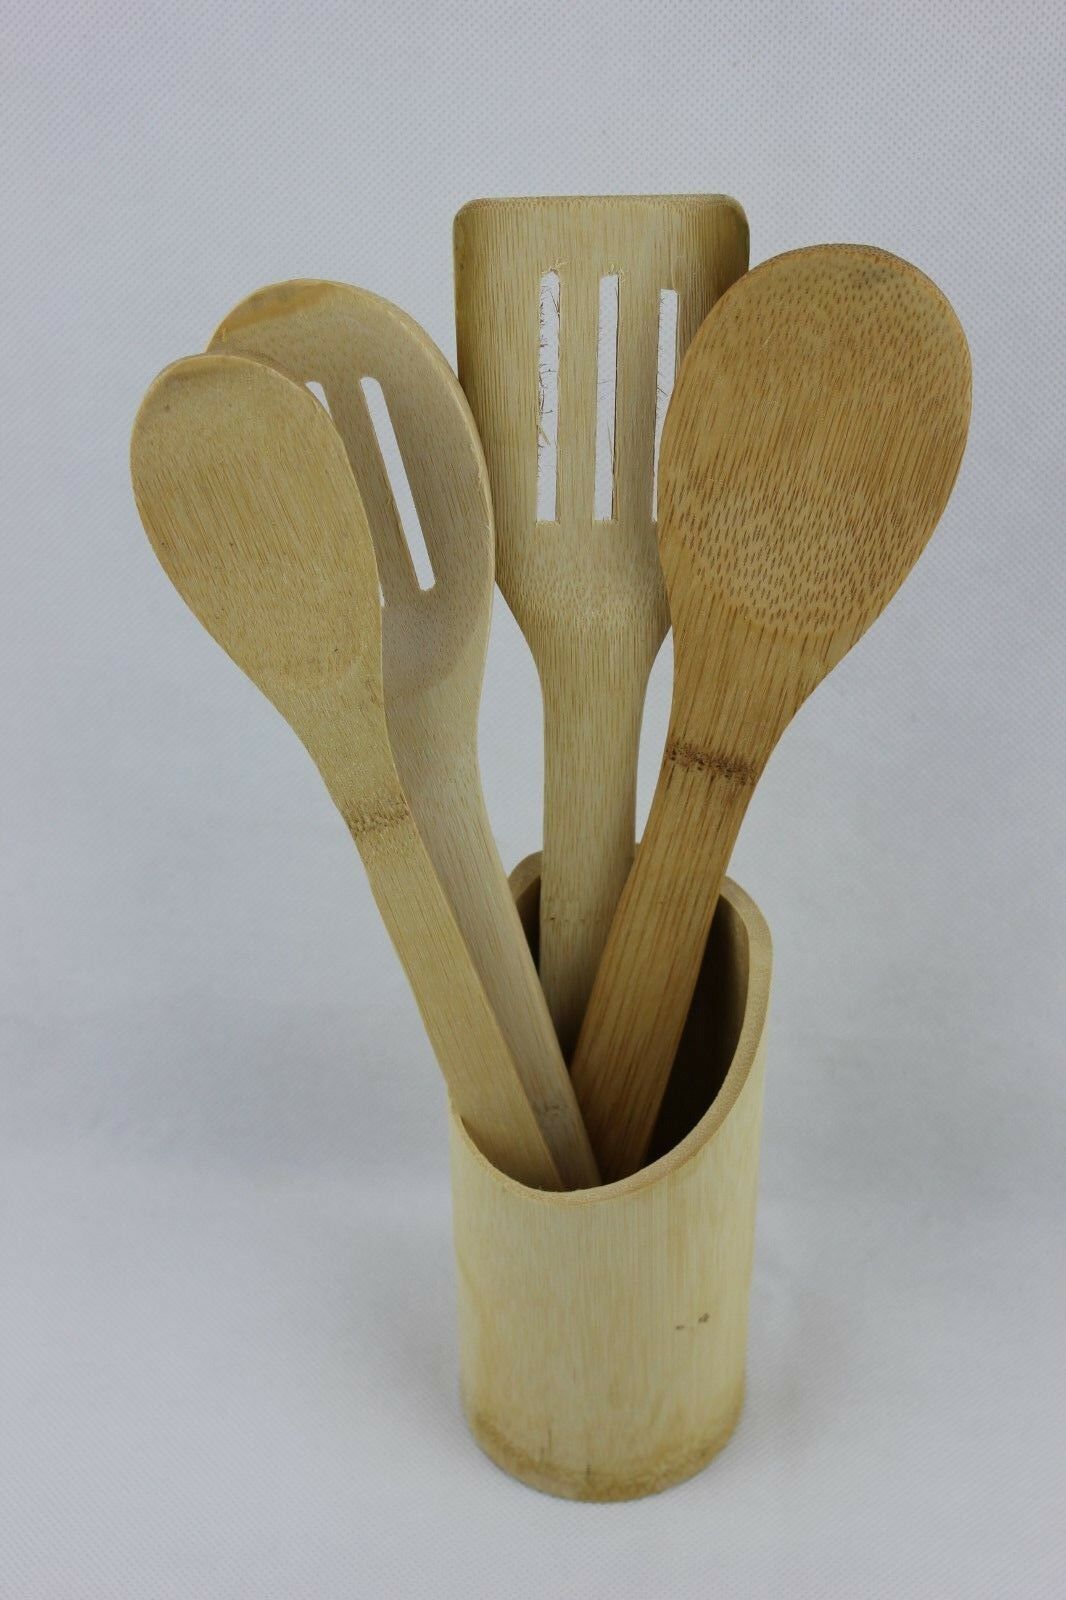 attachment-https://www.cupcakeaddicts.co.uk/wp-content/uploads/imported/8/Bamboo-Wooden-Kitchen-Utensils-Cooking-Spoons-Spatula-with-Holder-Eco-Friendly-323597352158-2.jpg